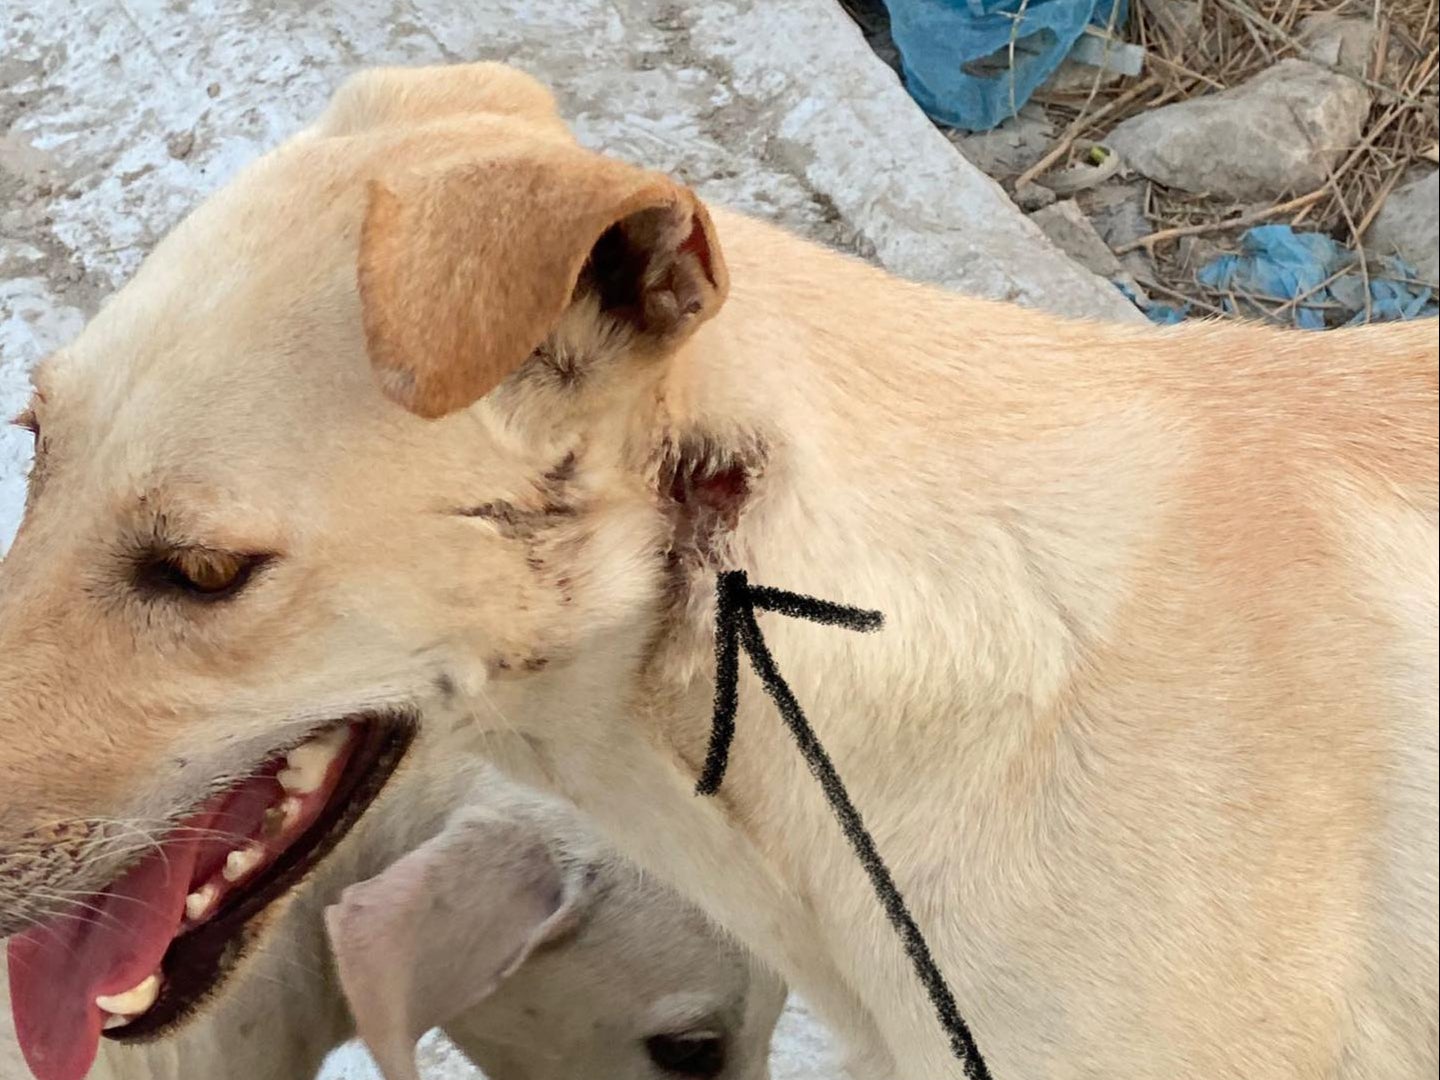 One of the dogs that survived has a bullet wound in its neck (pictured)